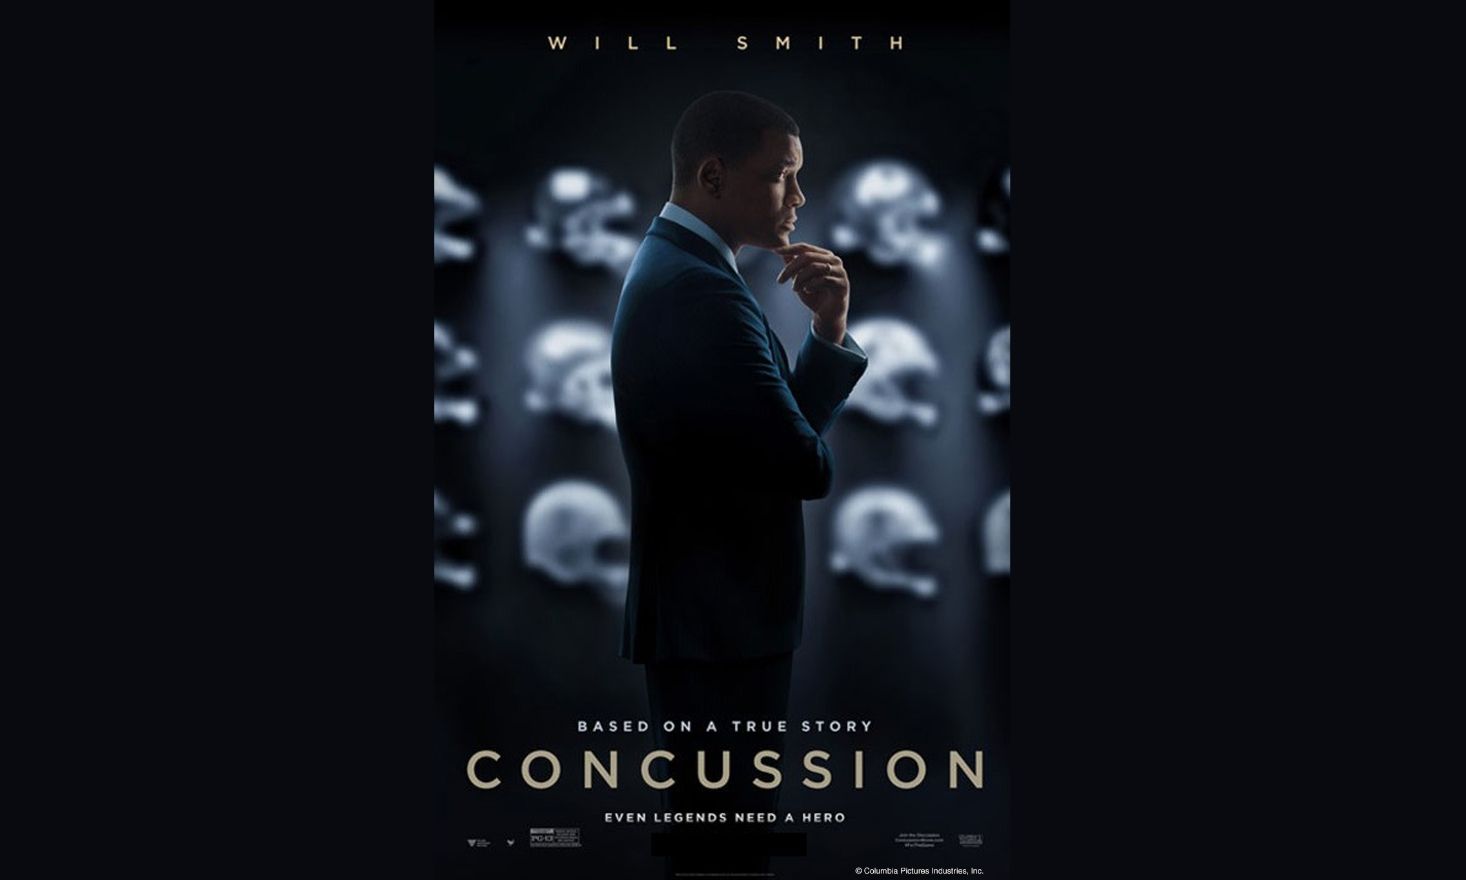 Movie poster for "Concussion" Will Smith's character looking deep in thought on black background